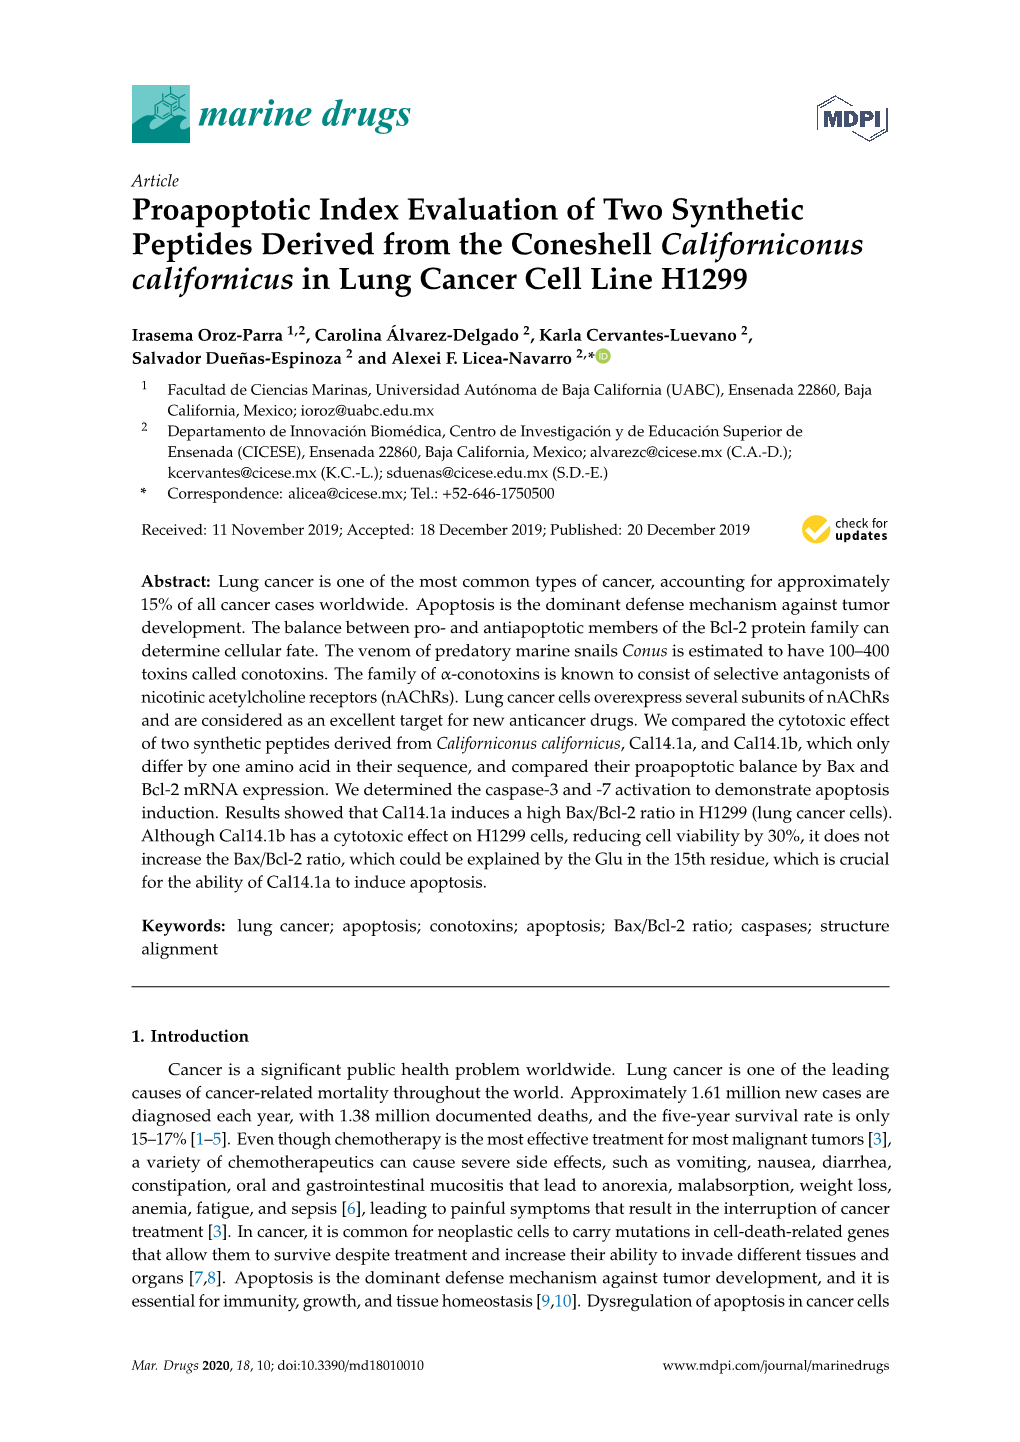 Proapoptotic Index Evaluation of Two Synthetic Peptides Derived from the Coneshell Californiconus Californicus in Lung Cancer Cell Line H1299